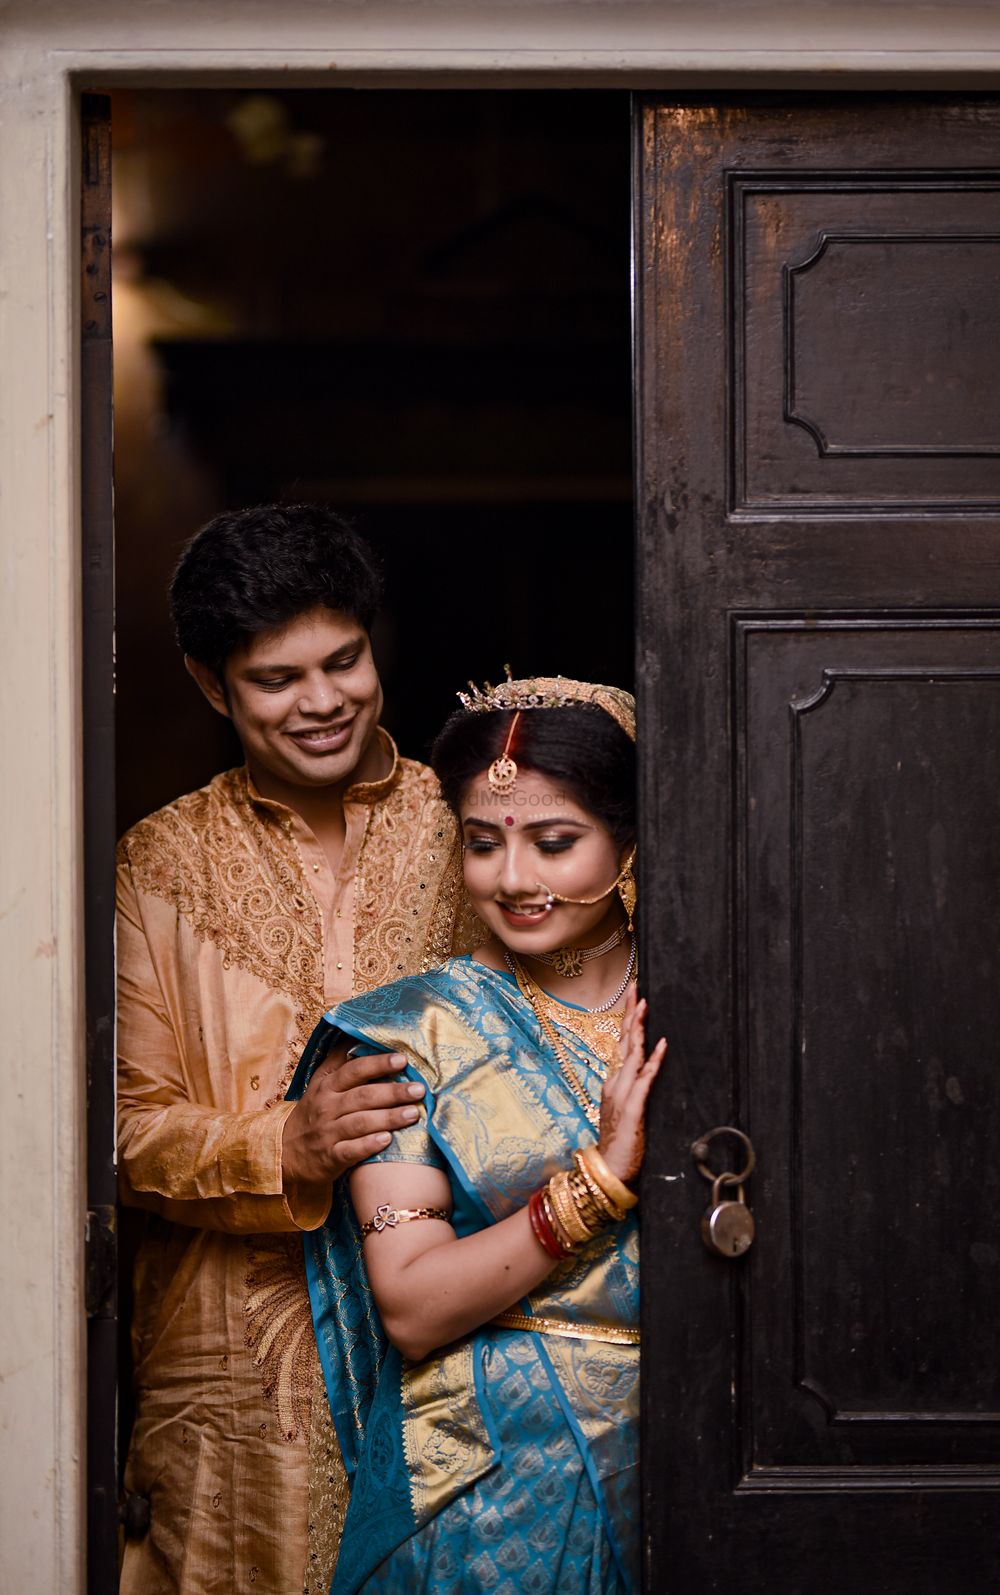 Photo From Rudra & Moumita - By The Wedding Memories